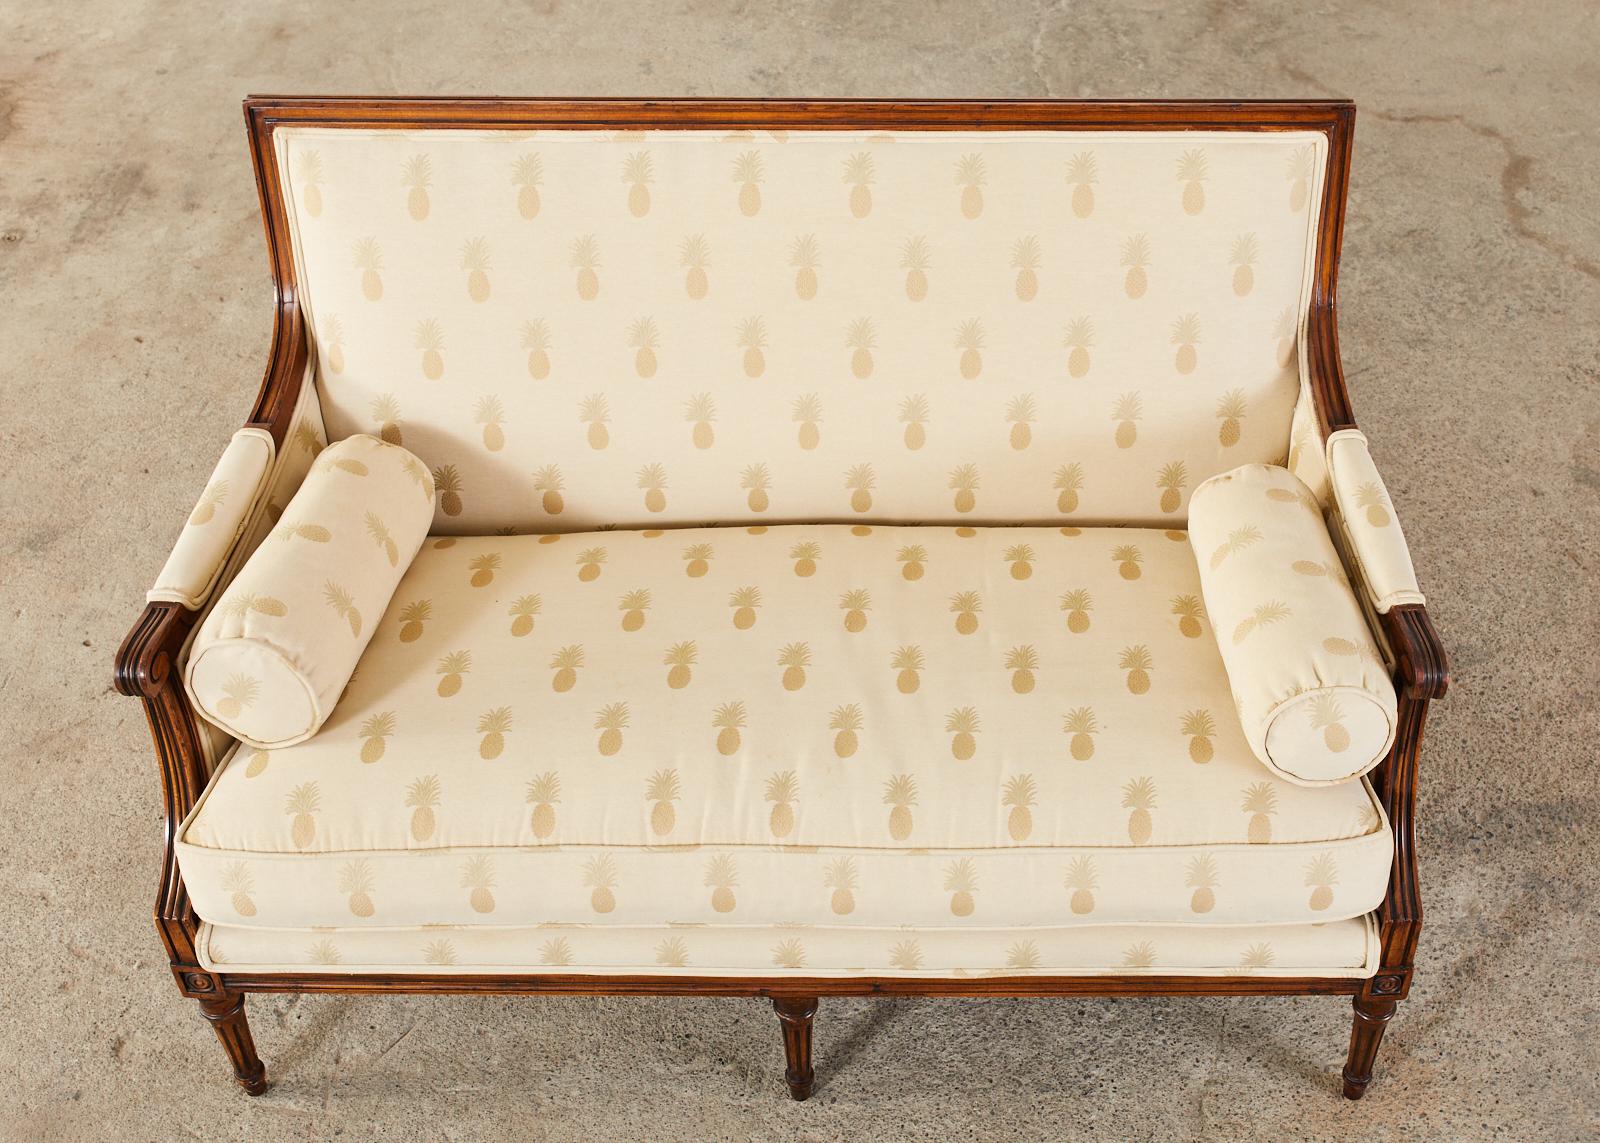 American French Louis XVI Style Settee with Pineapple Motif Fabric